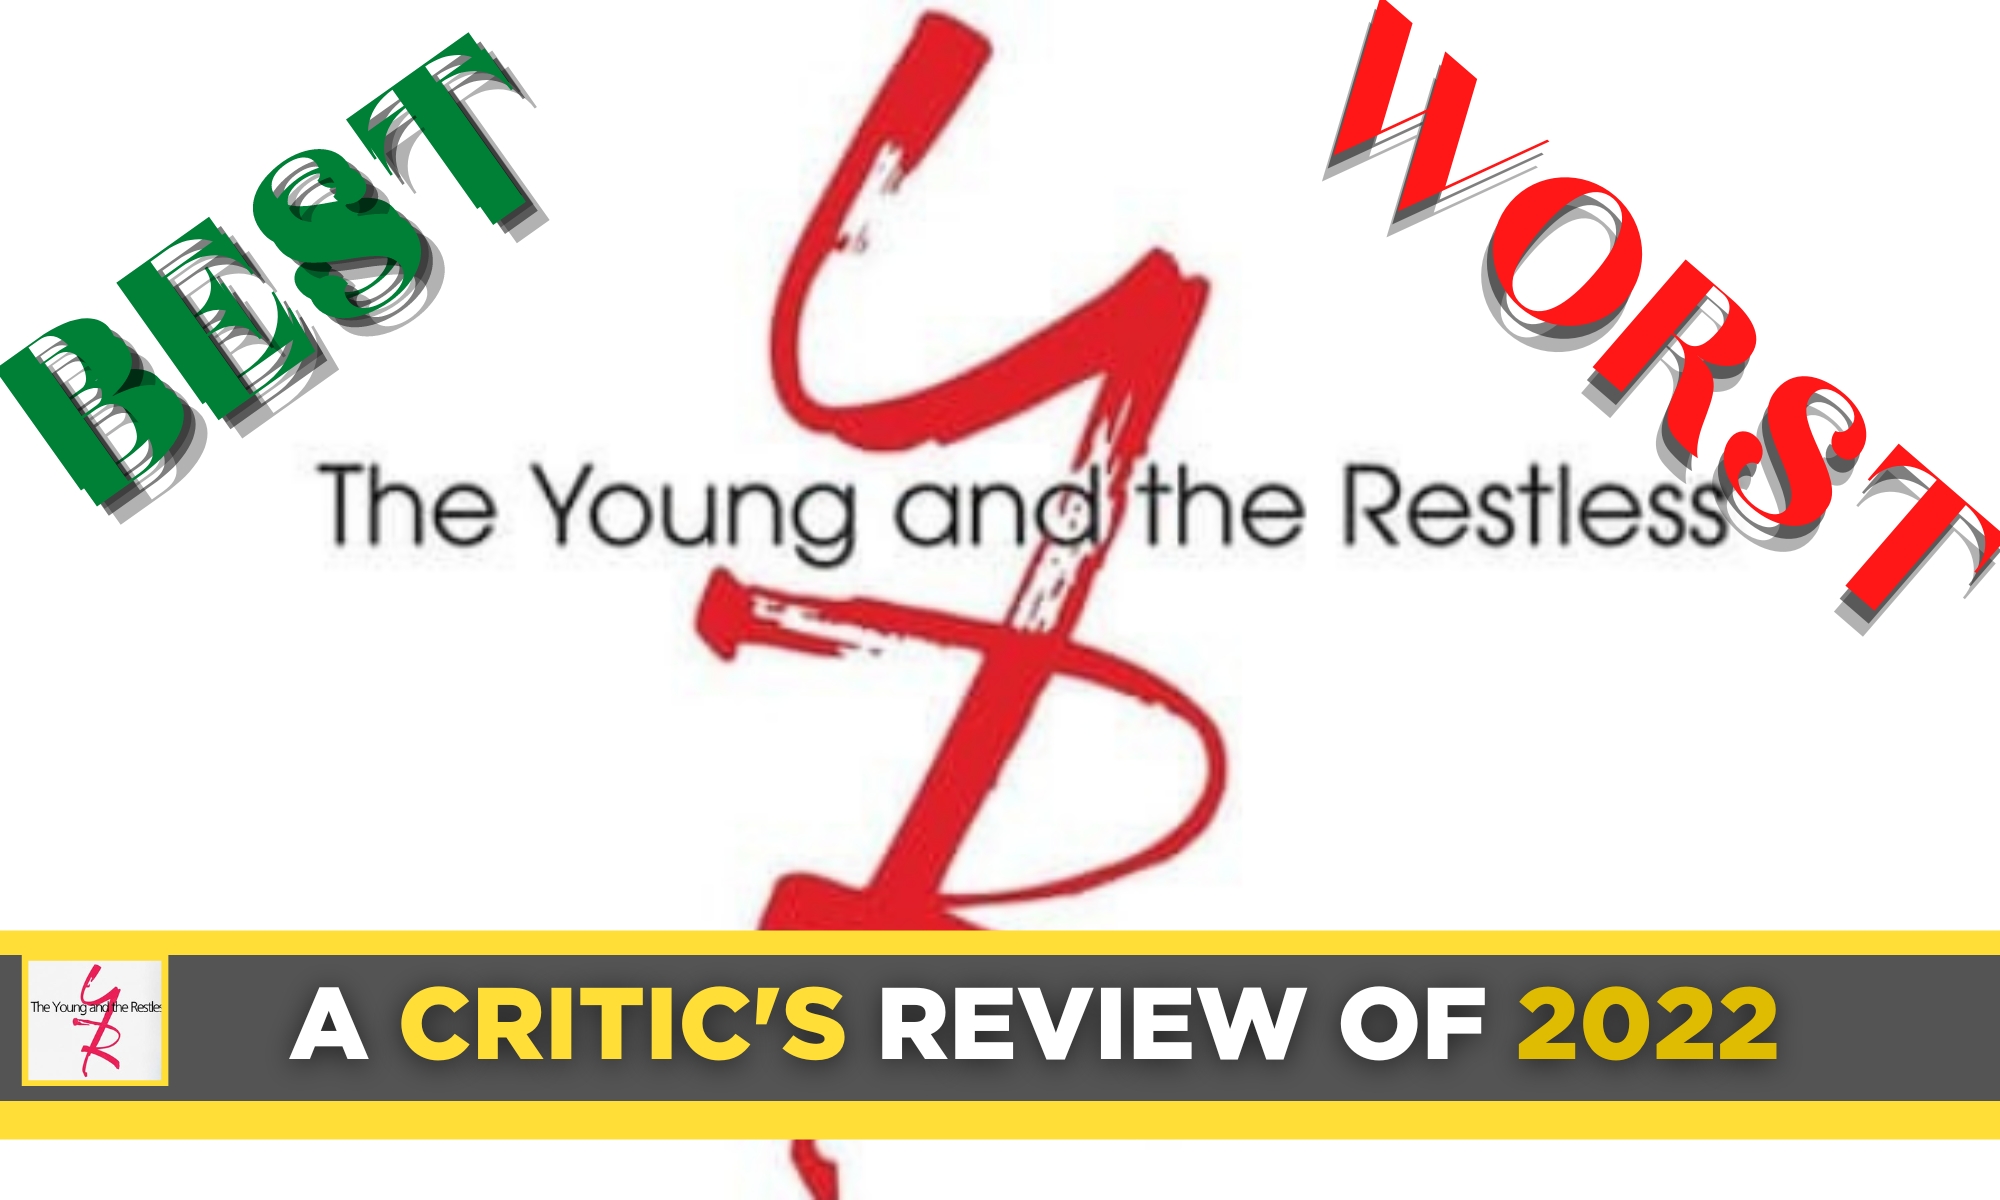 The Young and the Restless Critic's Review for 2022 – Roundup of the Best And Worst